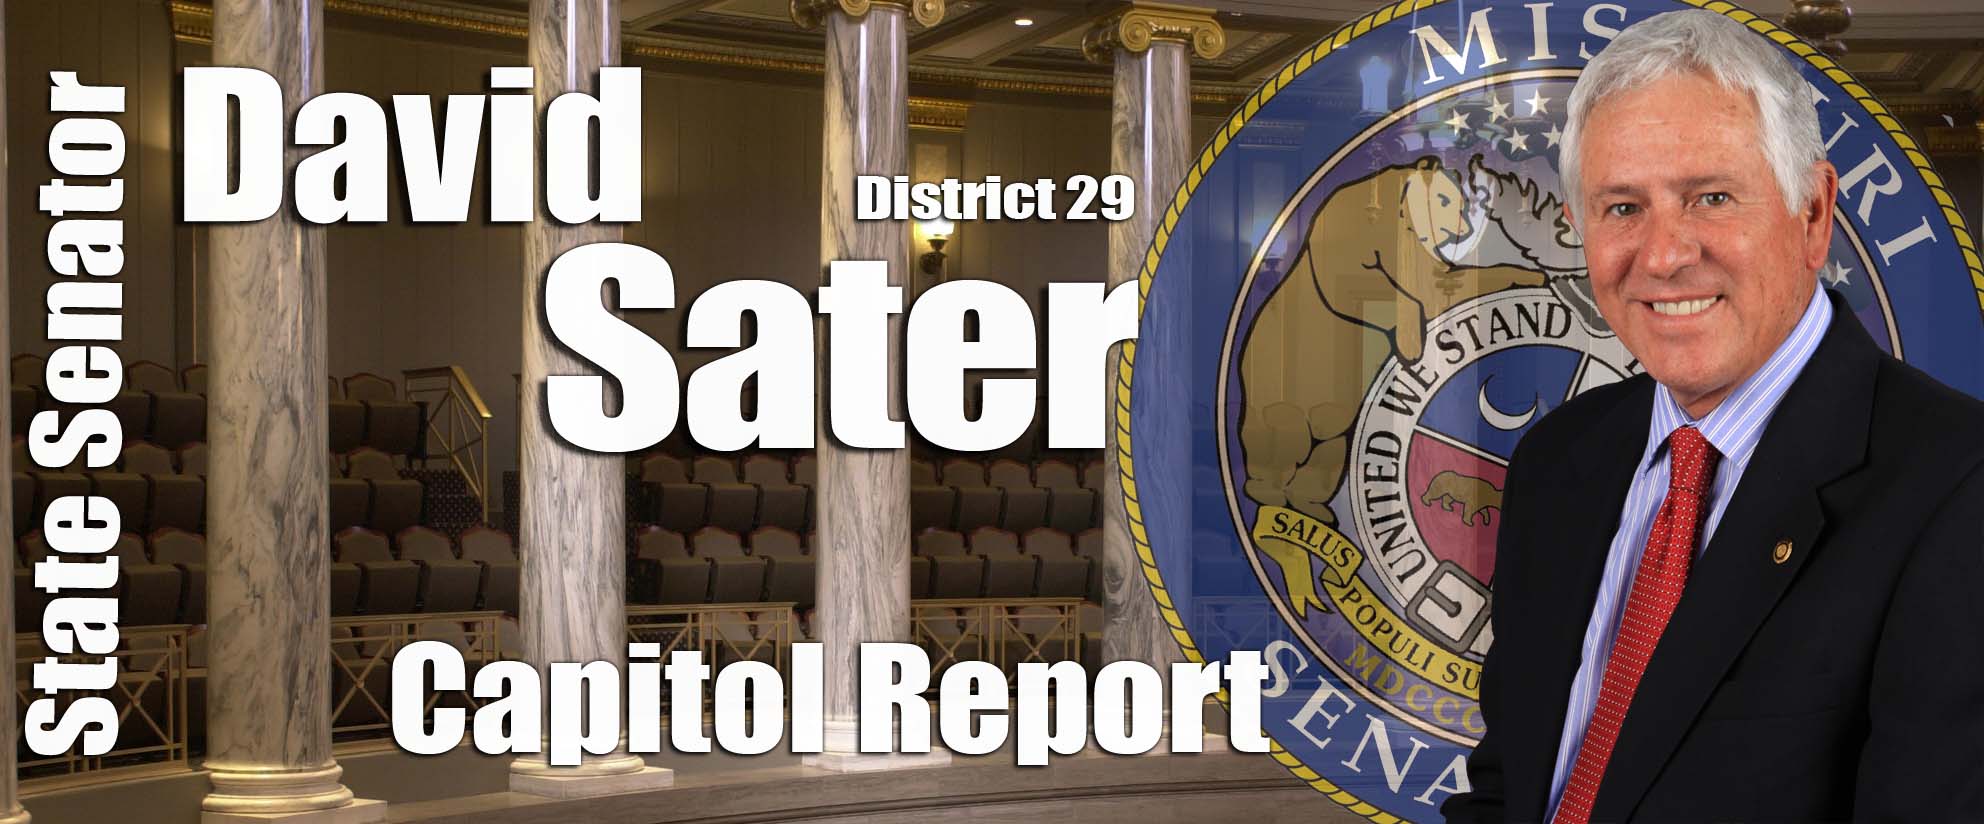 Sater - Capitol Report Banner - 010913 copy